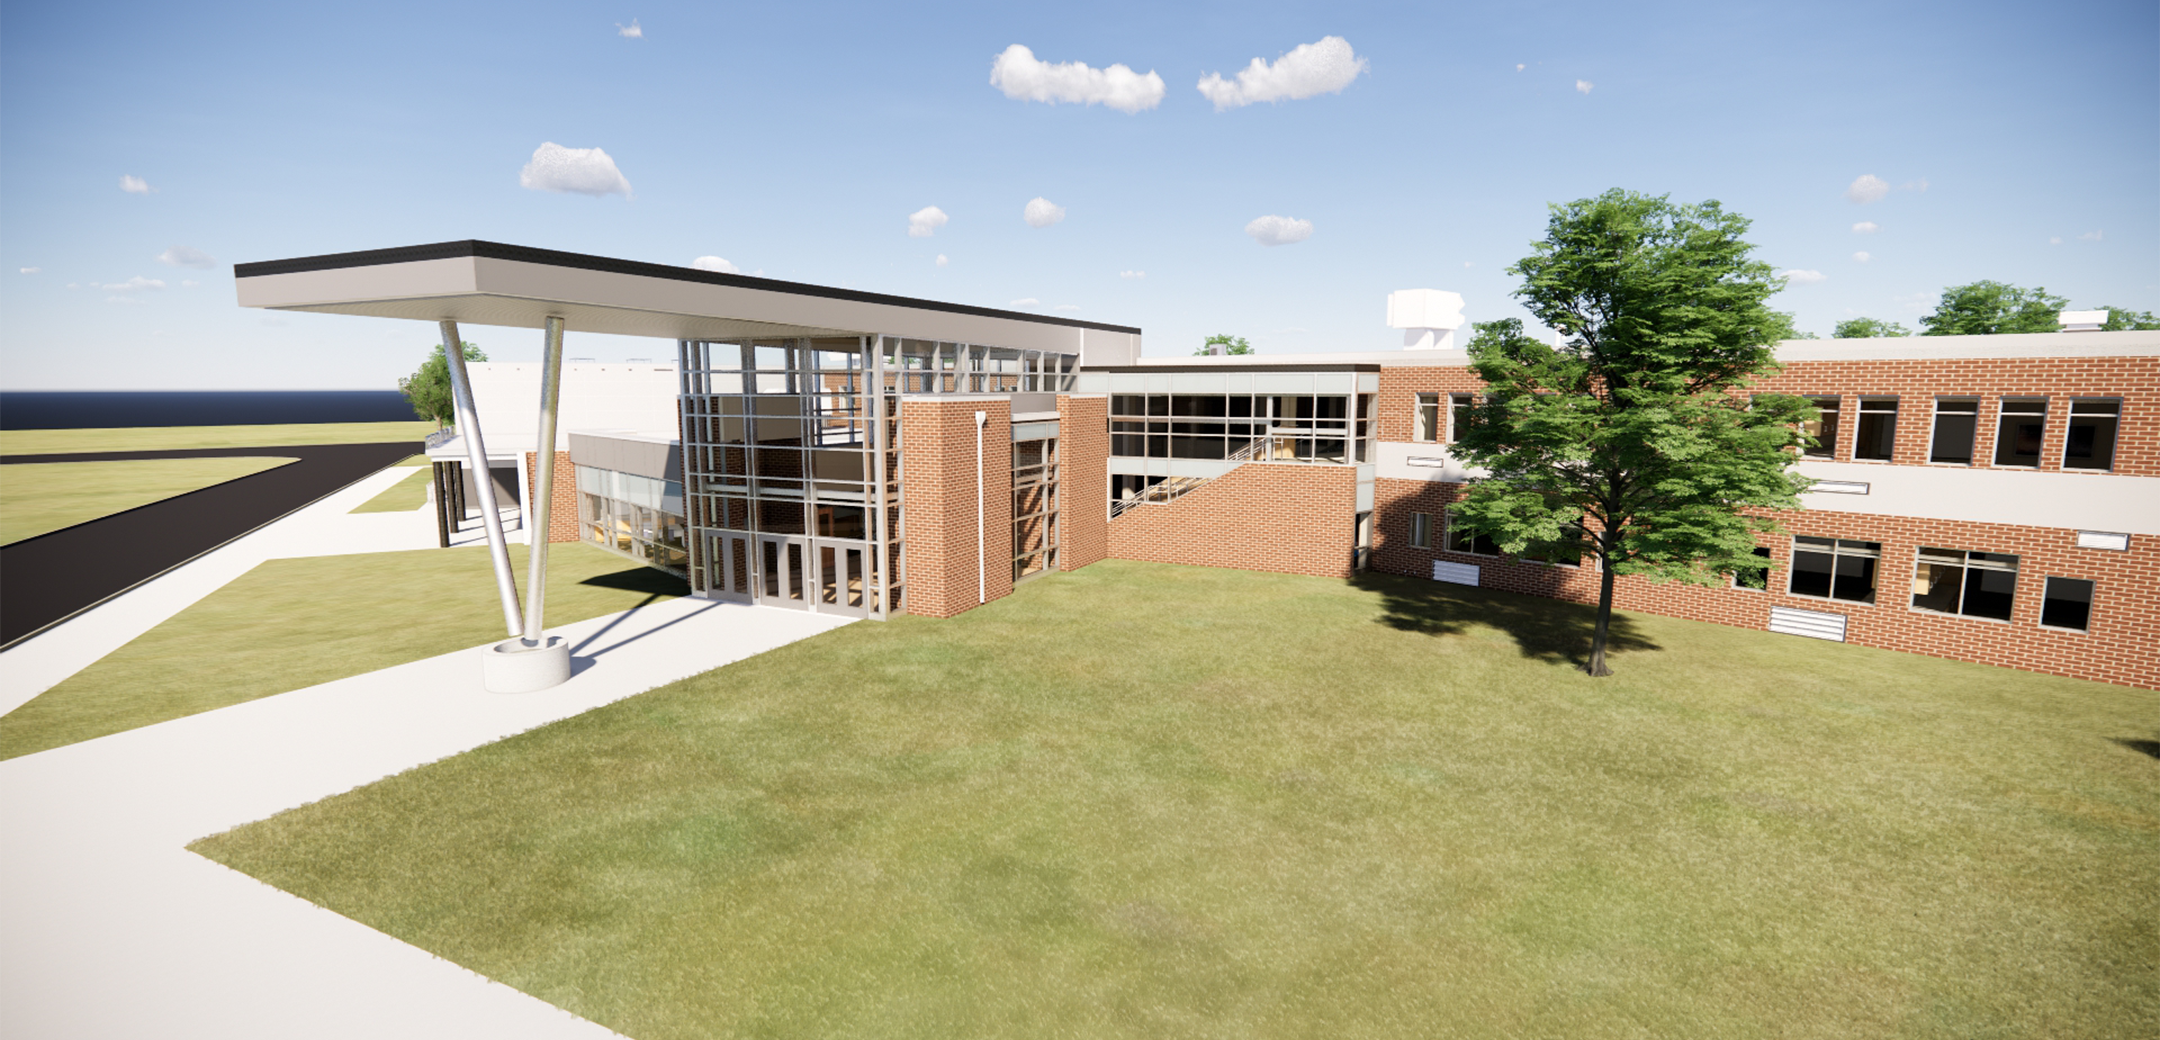 A rendering of the Ben Franklin Middle School main entrance and front lawn showcasing the overhang design and it`s supporting pillars.